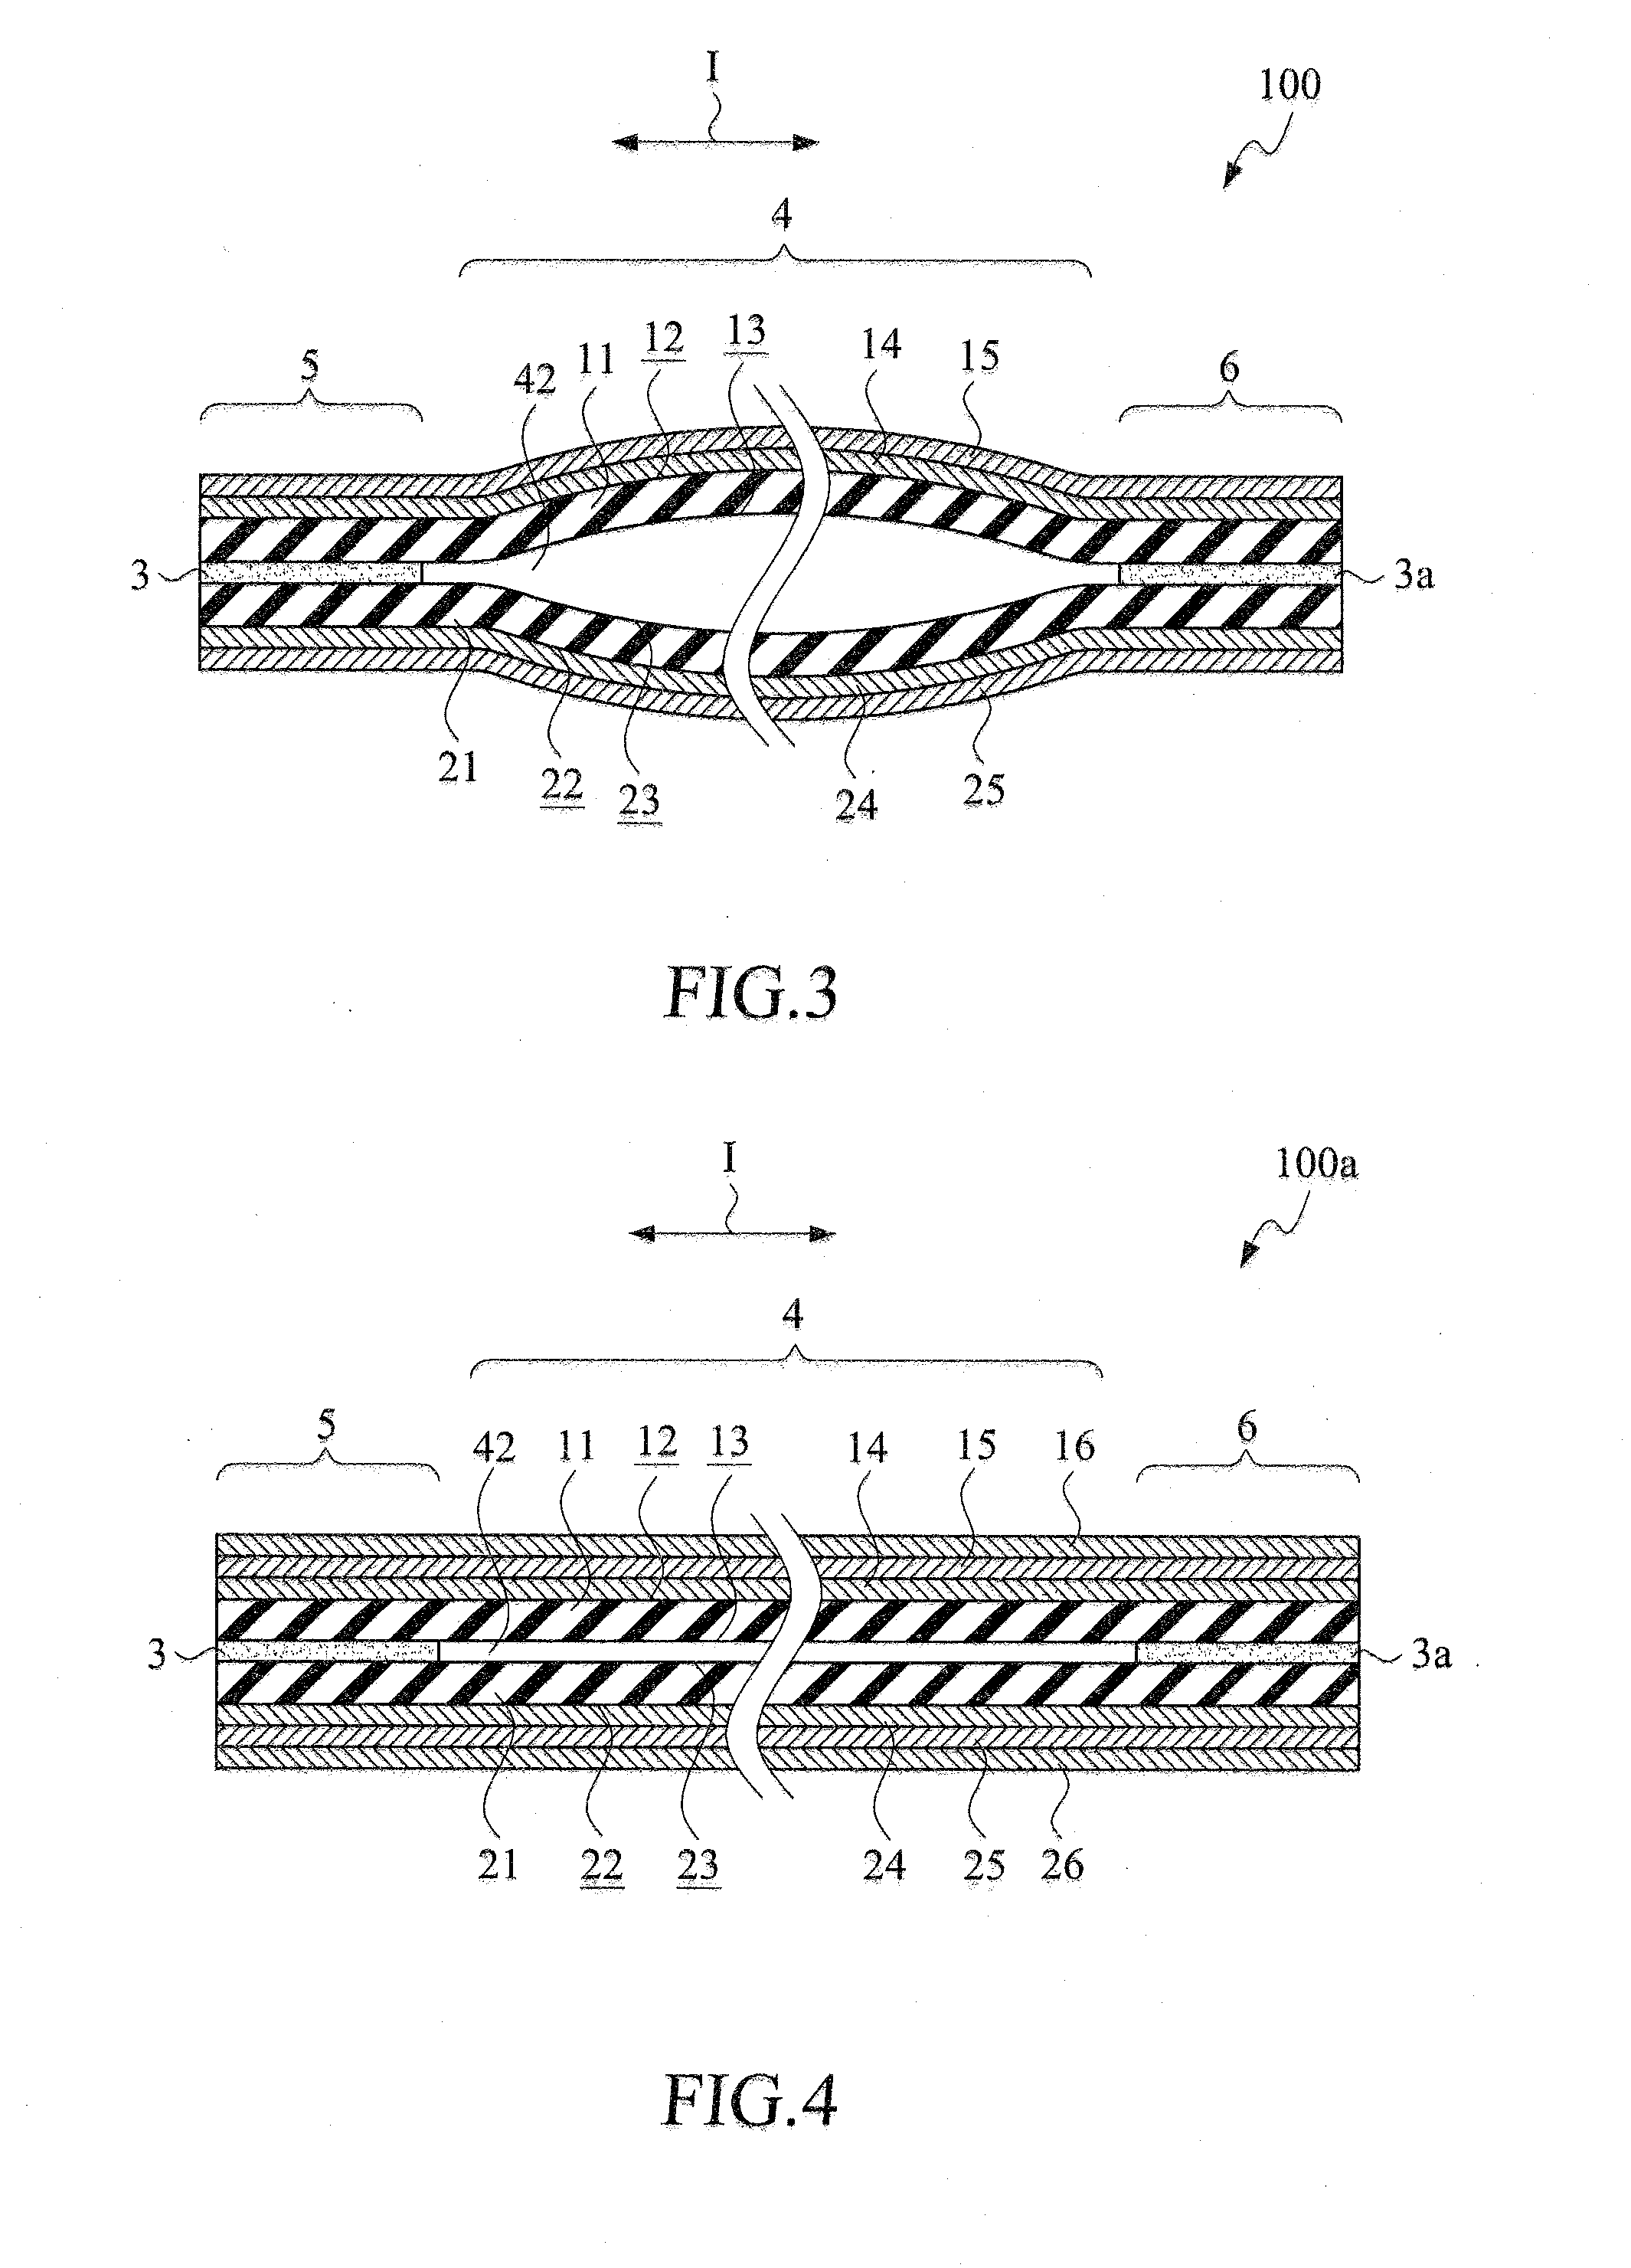 Flexible flat circuit cable with gapped section